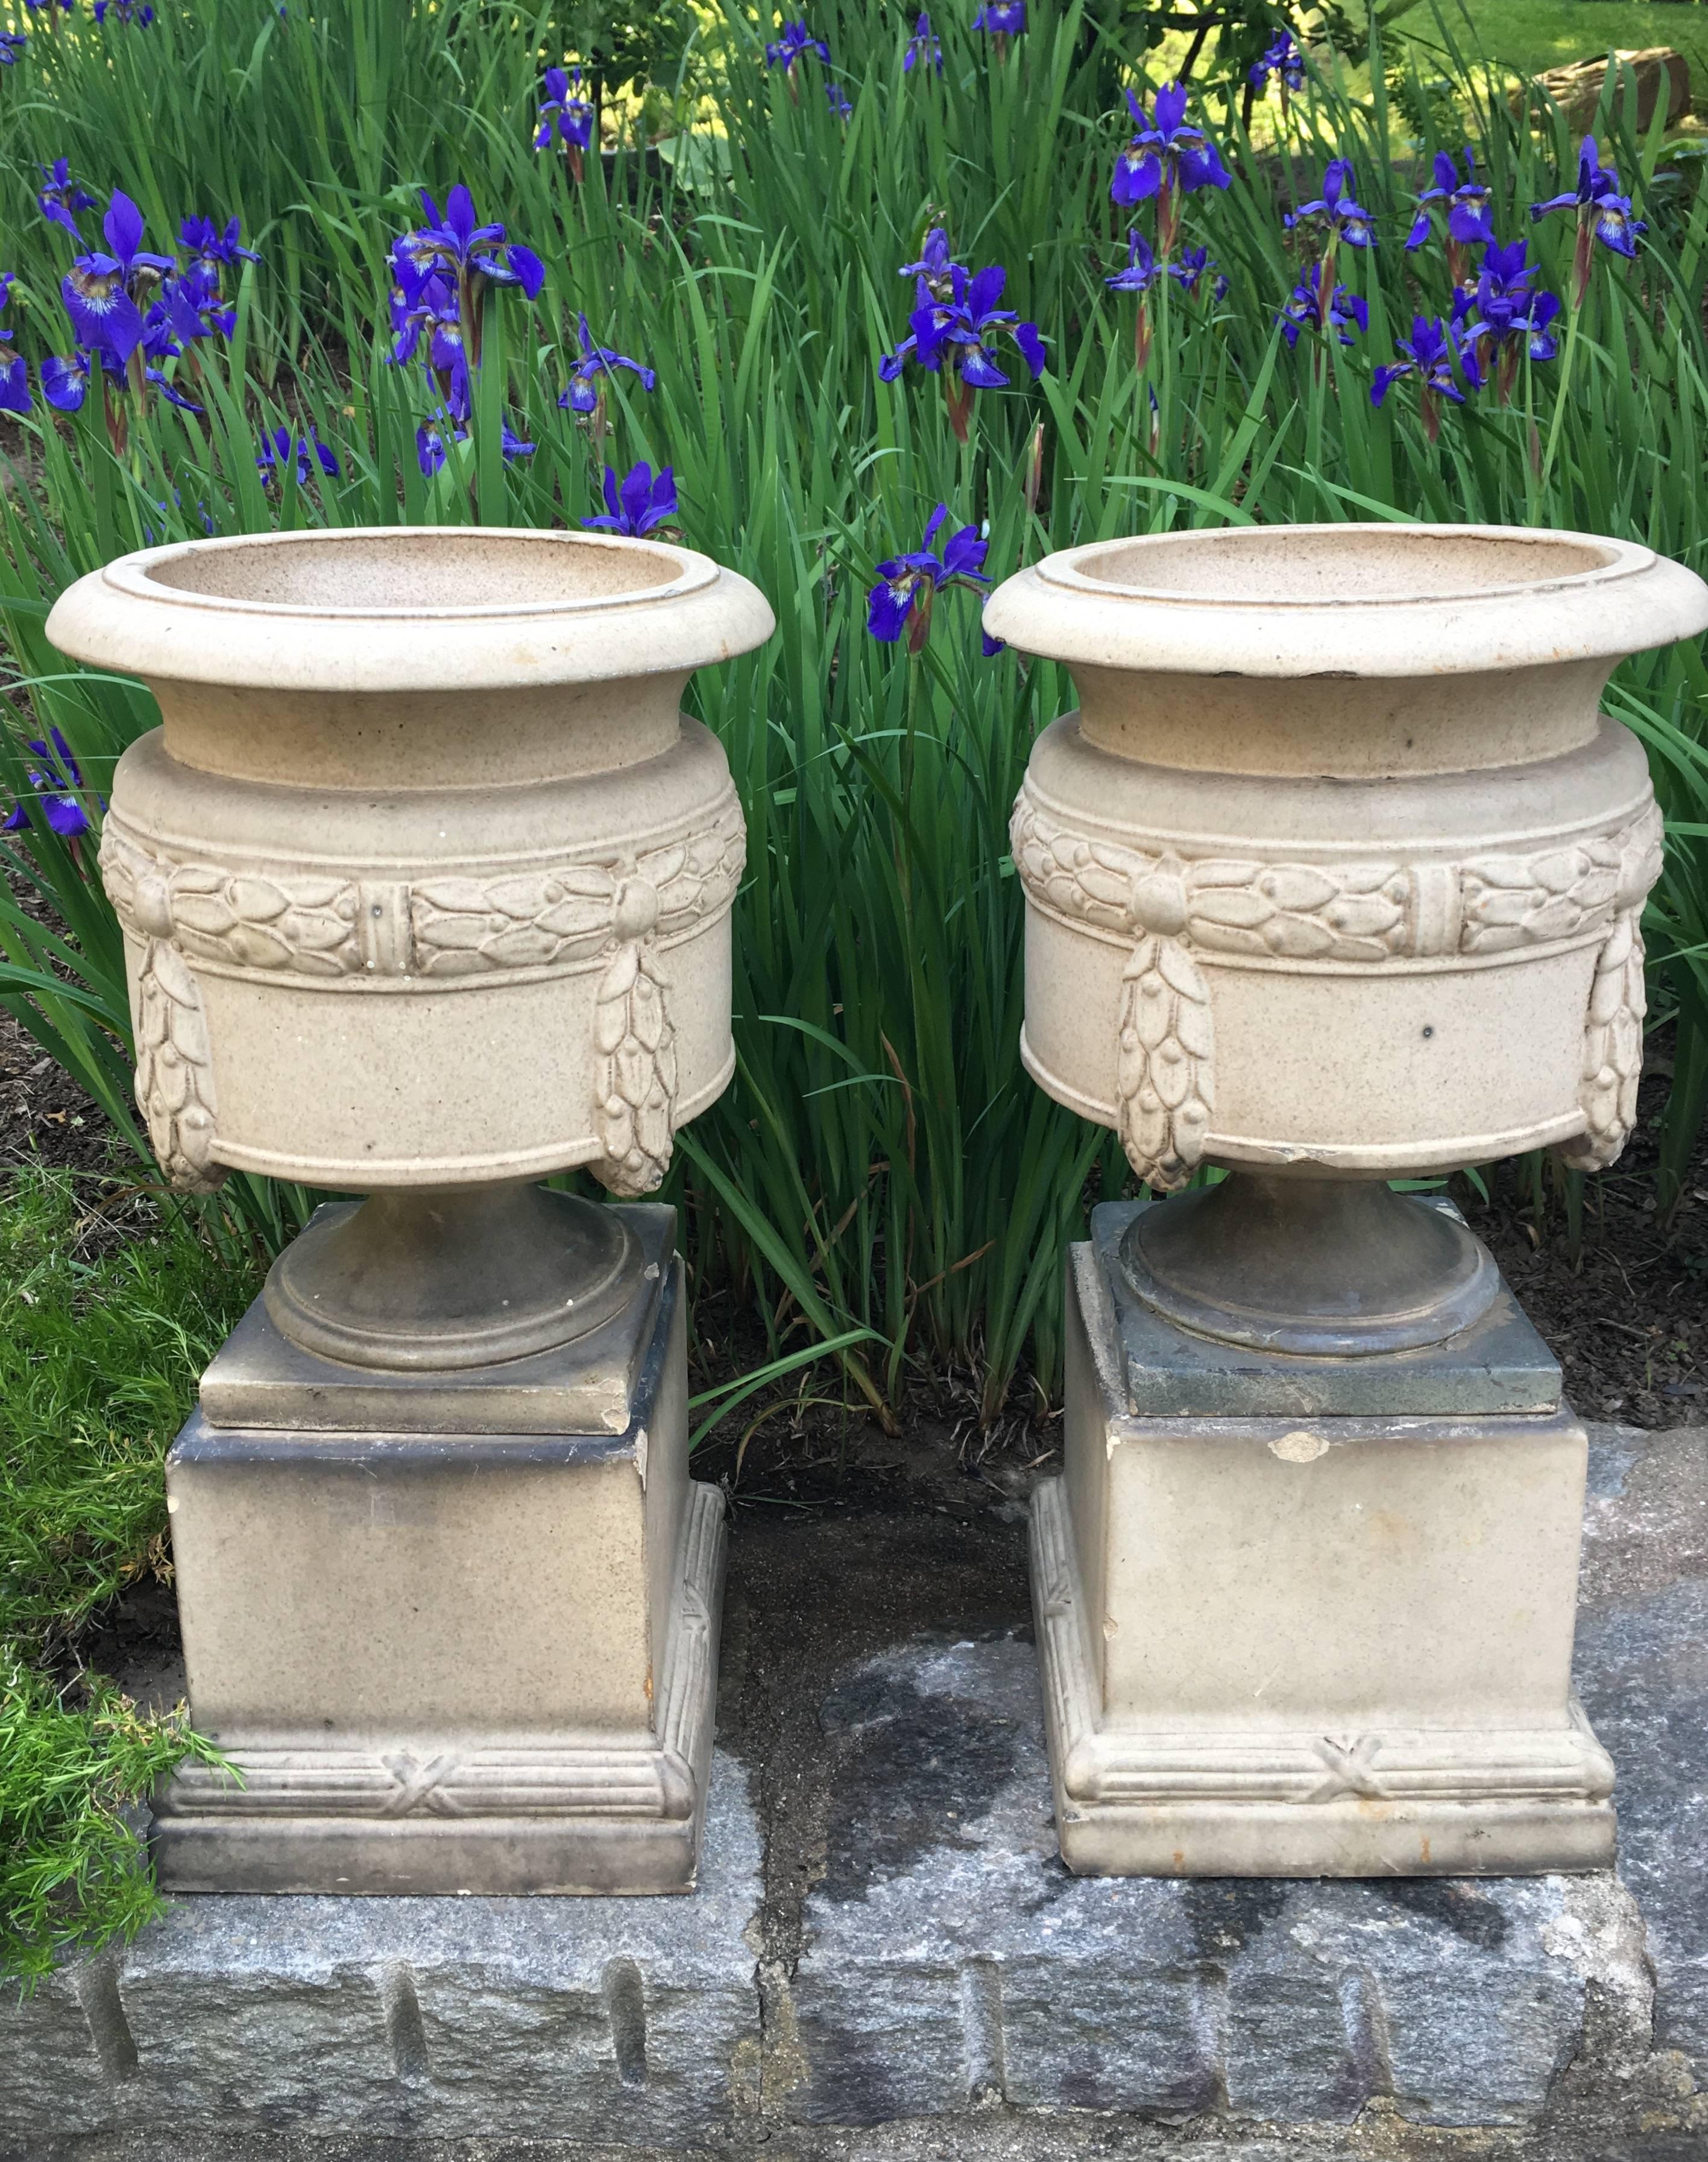 Signed inside the bases by the Leeds Fireclay Company (LEFCO), these urns in three parts have a rare form and their original plinths. Beautiful laurel wreath swaging decoration. Gorgeous on their own or potted and placed inside or out.
Fireclay is